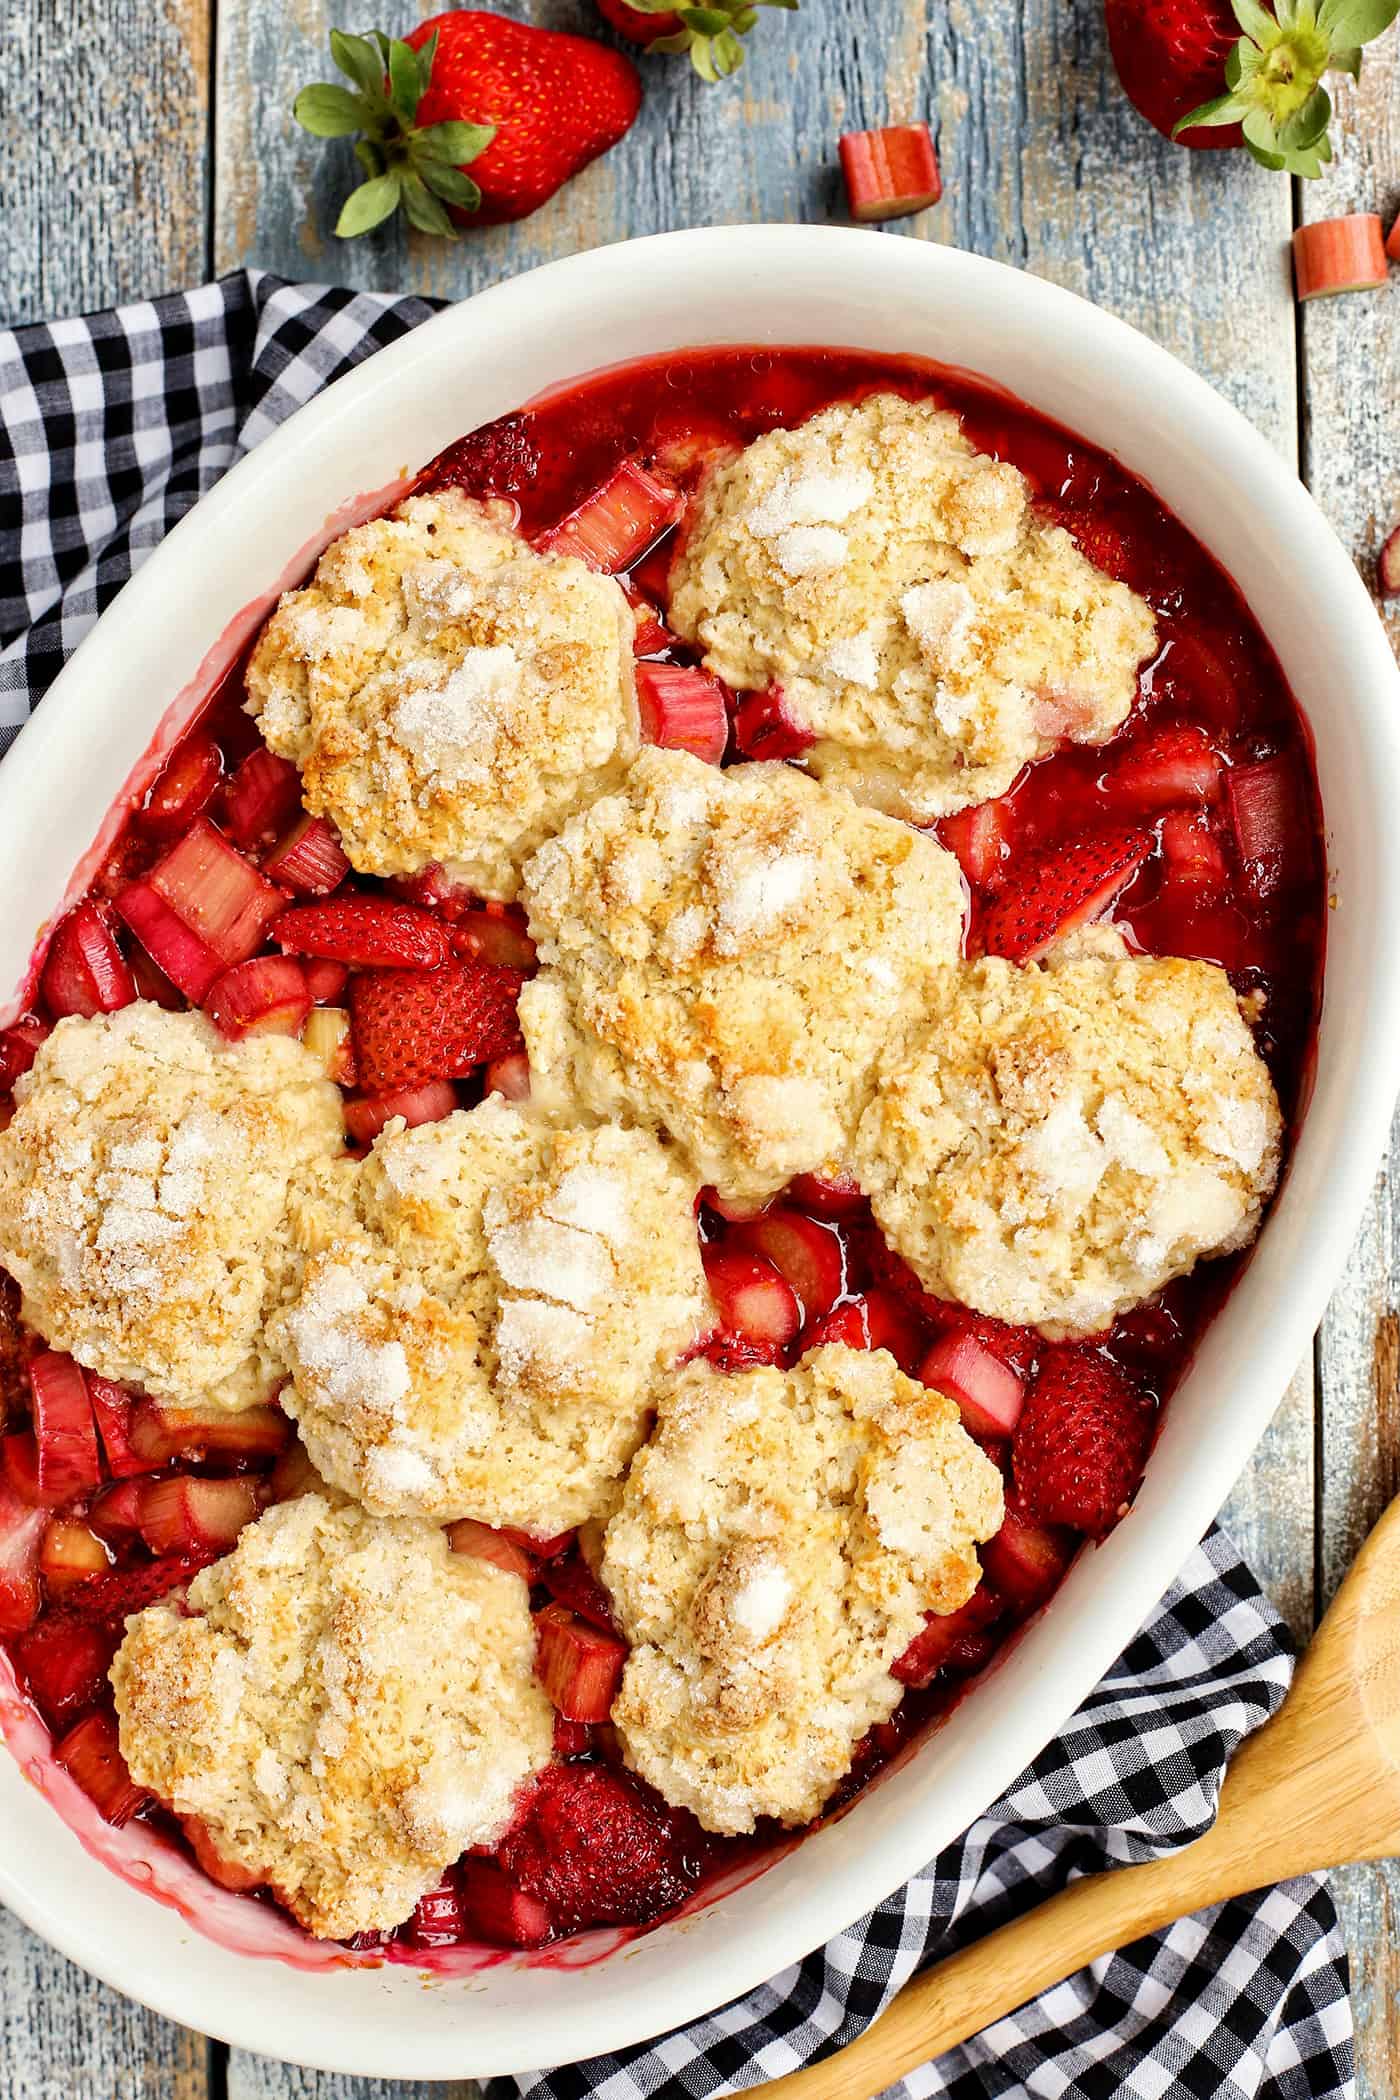 Overhead view of Strawberry Rhubarb Cobbler in an oval baking dish